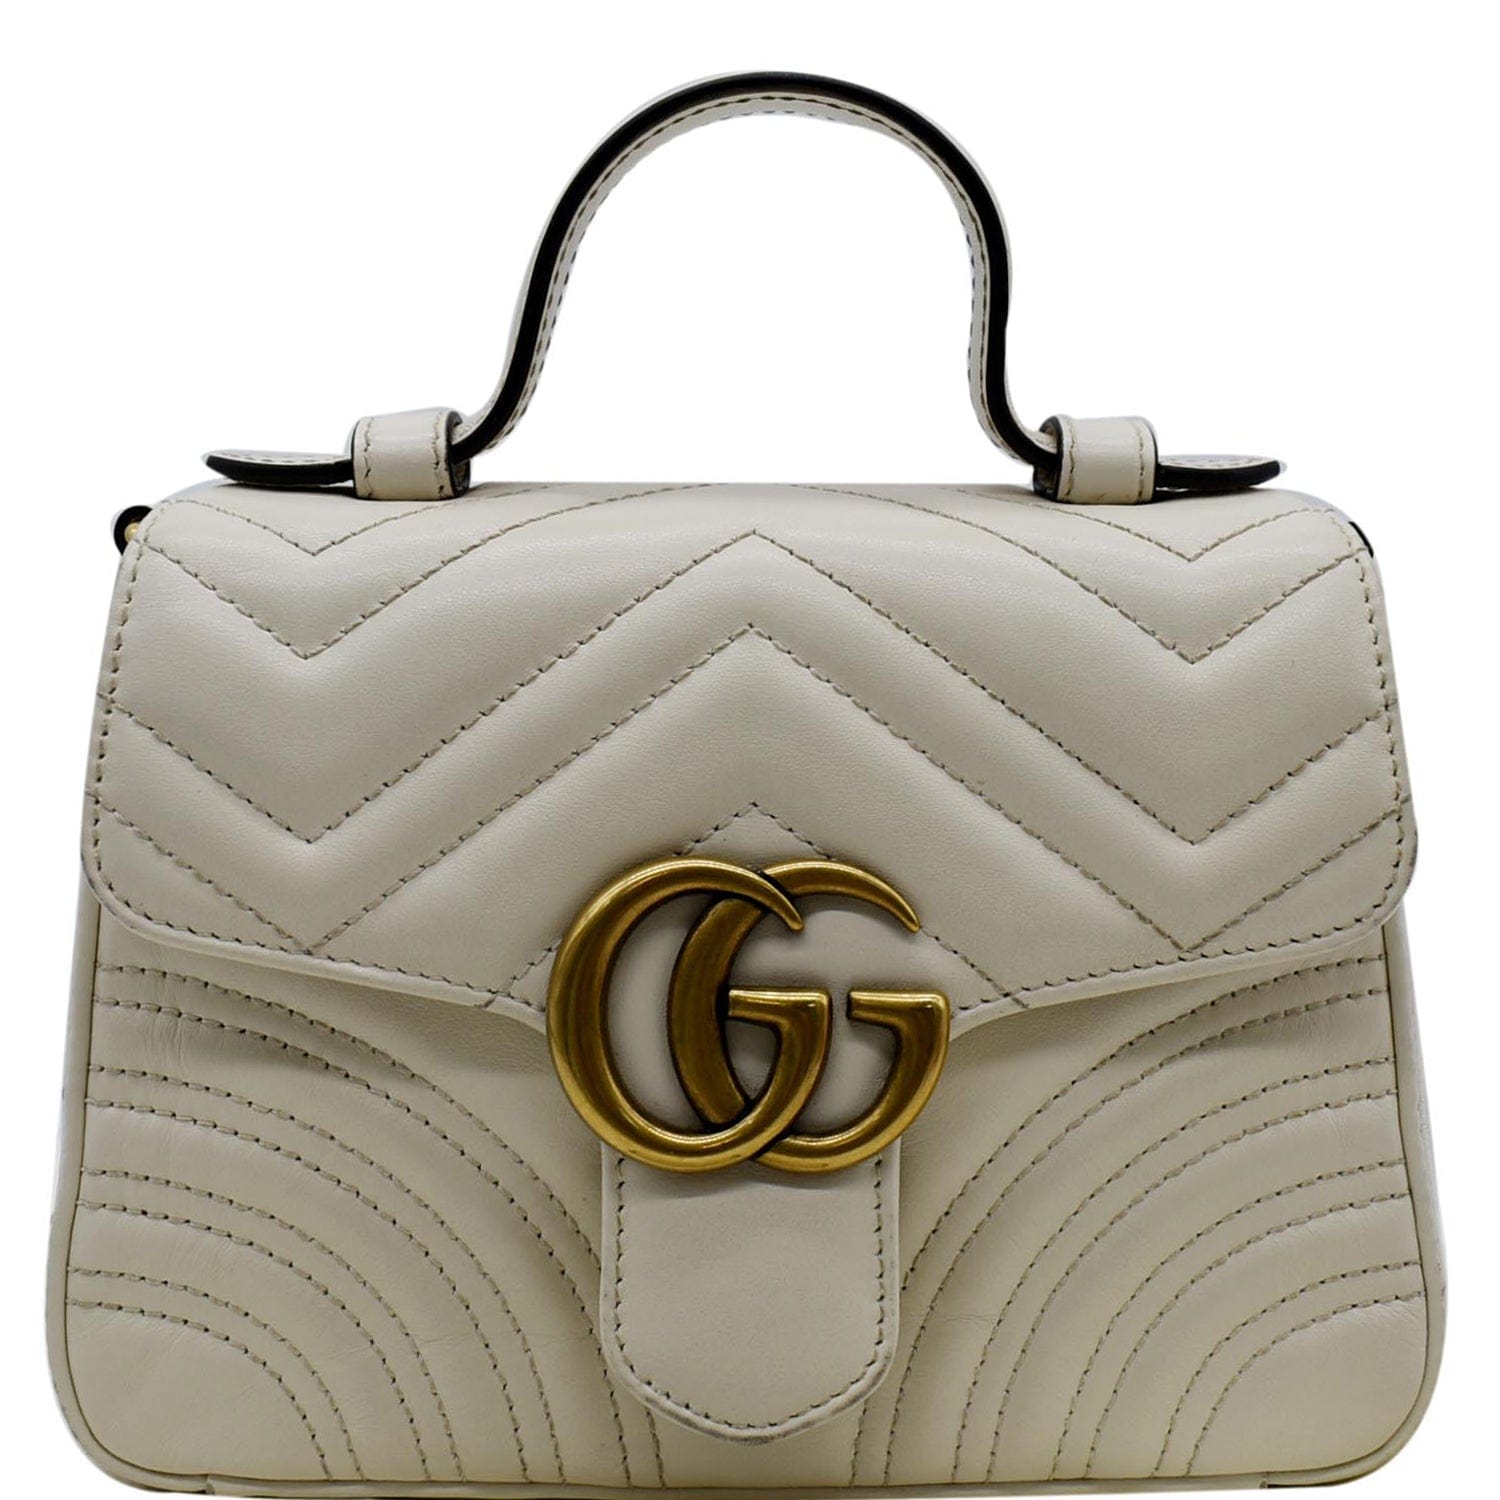 Gucci Marmont top Handle white small bag